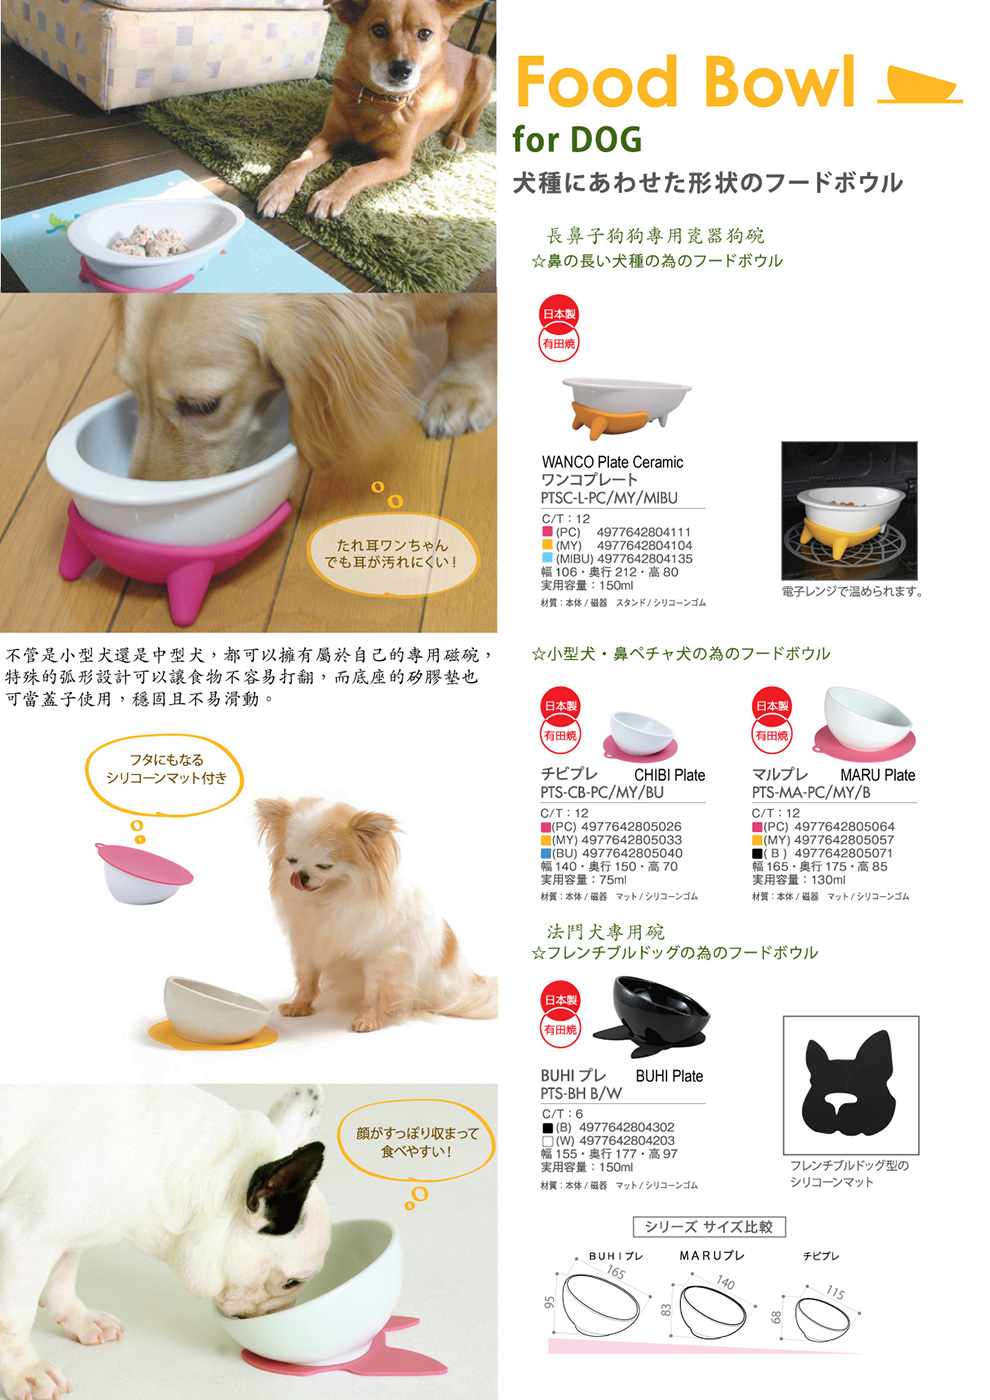 HARIO, Pet goods, Made in Japan, Dog, Food Bowl, PTSC-L-PC, PTSC-L-PC, PTSC-L-MY, PTSC-L-MIBU, PTS-CB-PC, PTS-CB-MY, PTS-CB-BU, PTS-MA-PC, PTS-MA-MY, PTS-MA-B, PTS-BH-B, PTS-BH-W